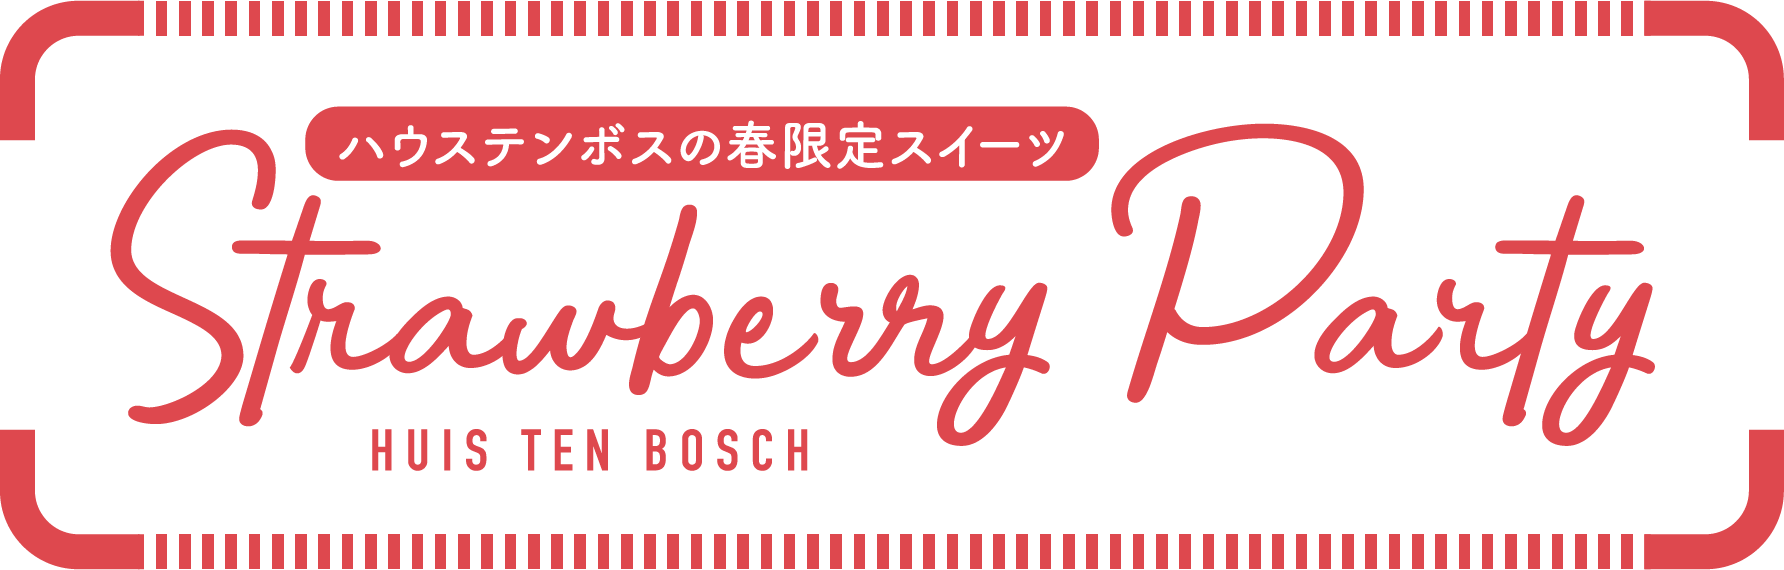 Huis Ten Bosch Spring Limited Sweets Strawberry Party HUIS TEN BOSCH